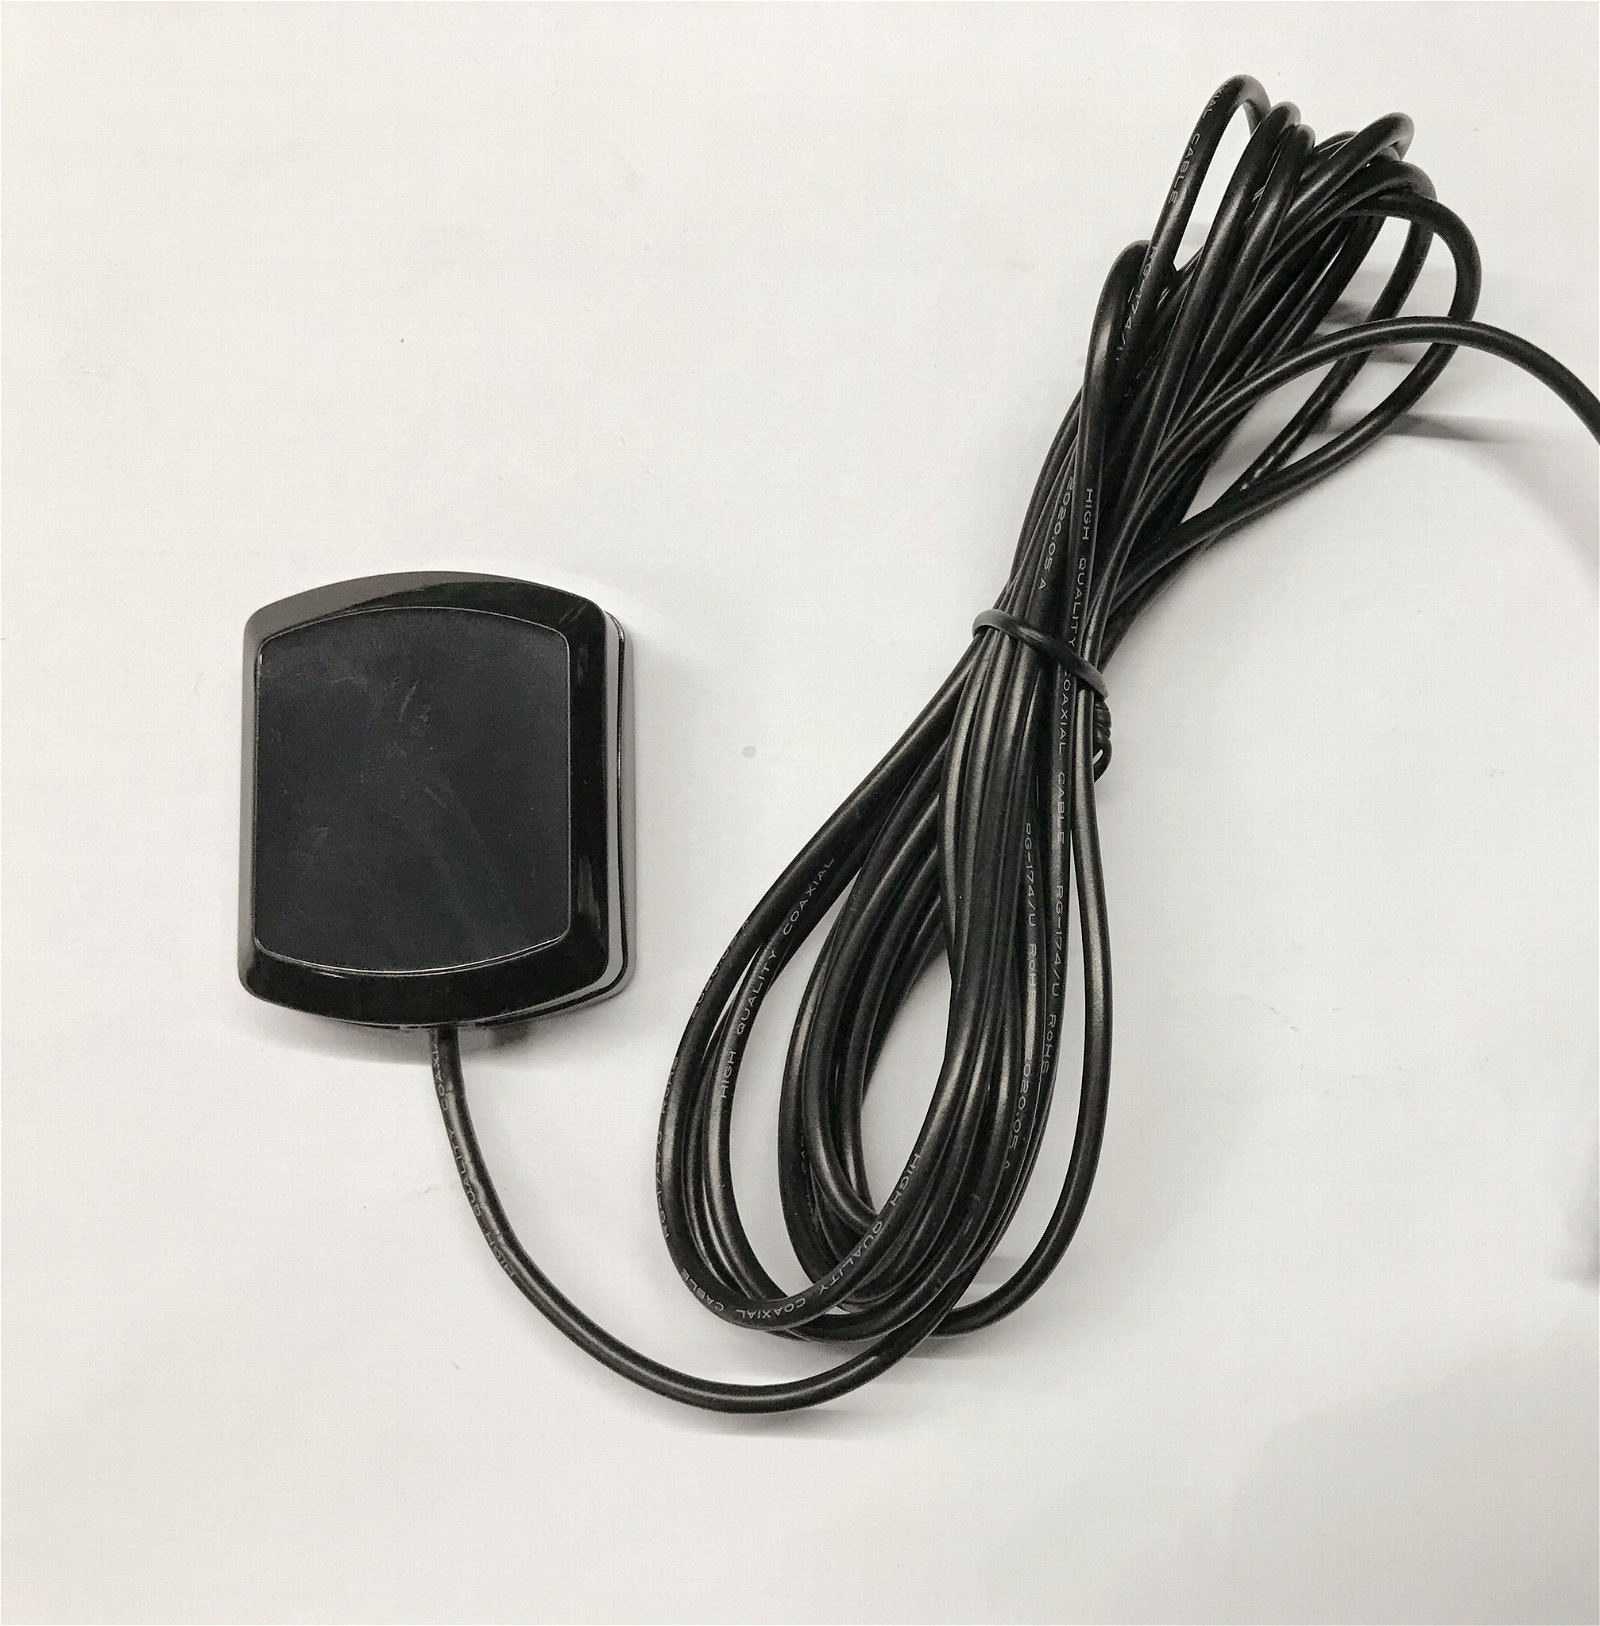 waterproof outdoor high gain QMA female Magnetic or adhesive mount GPS antenna 3